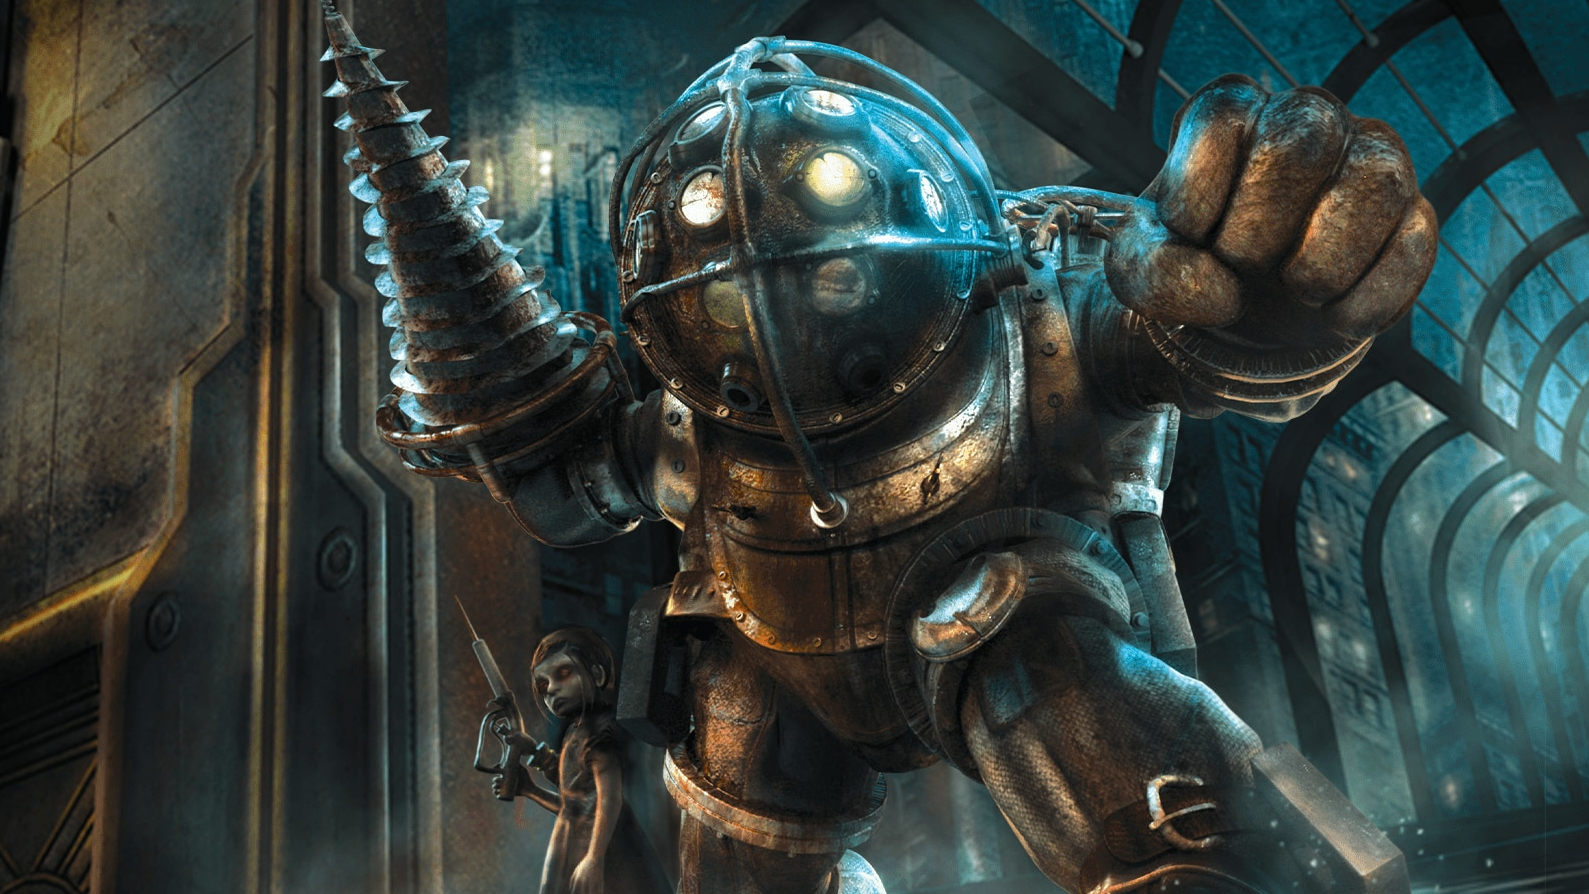 games like bioshock and system shock